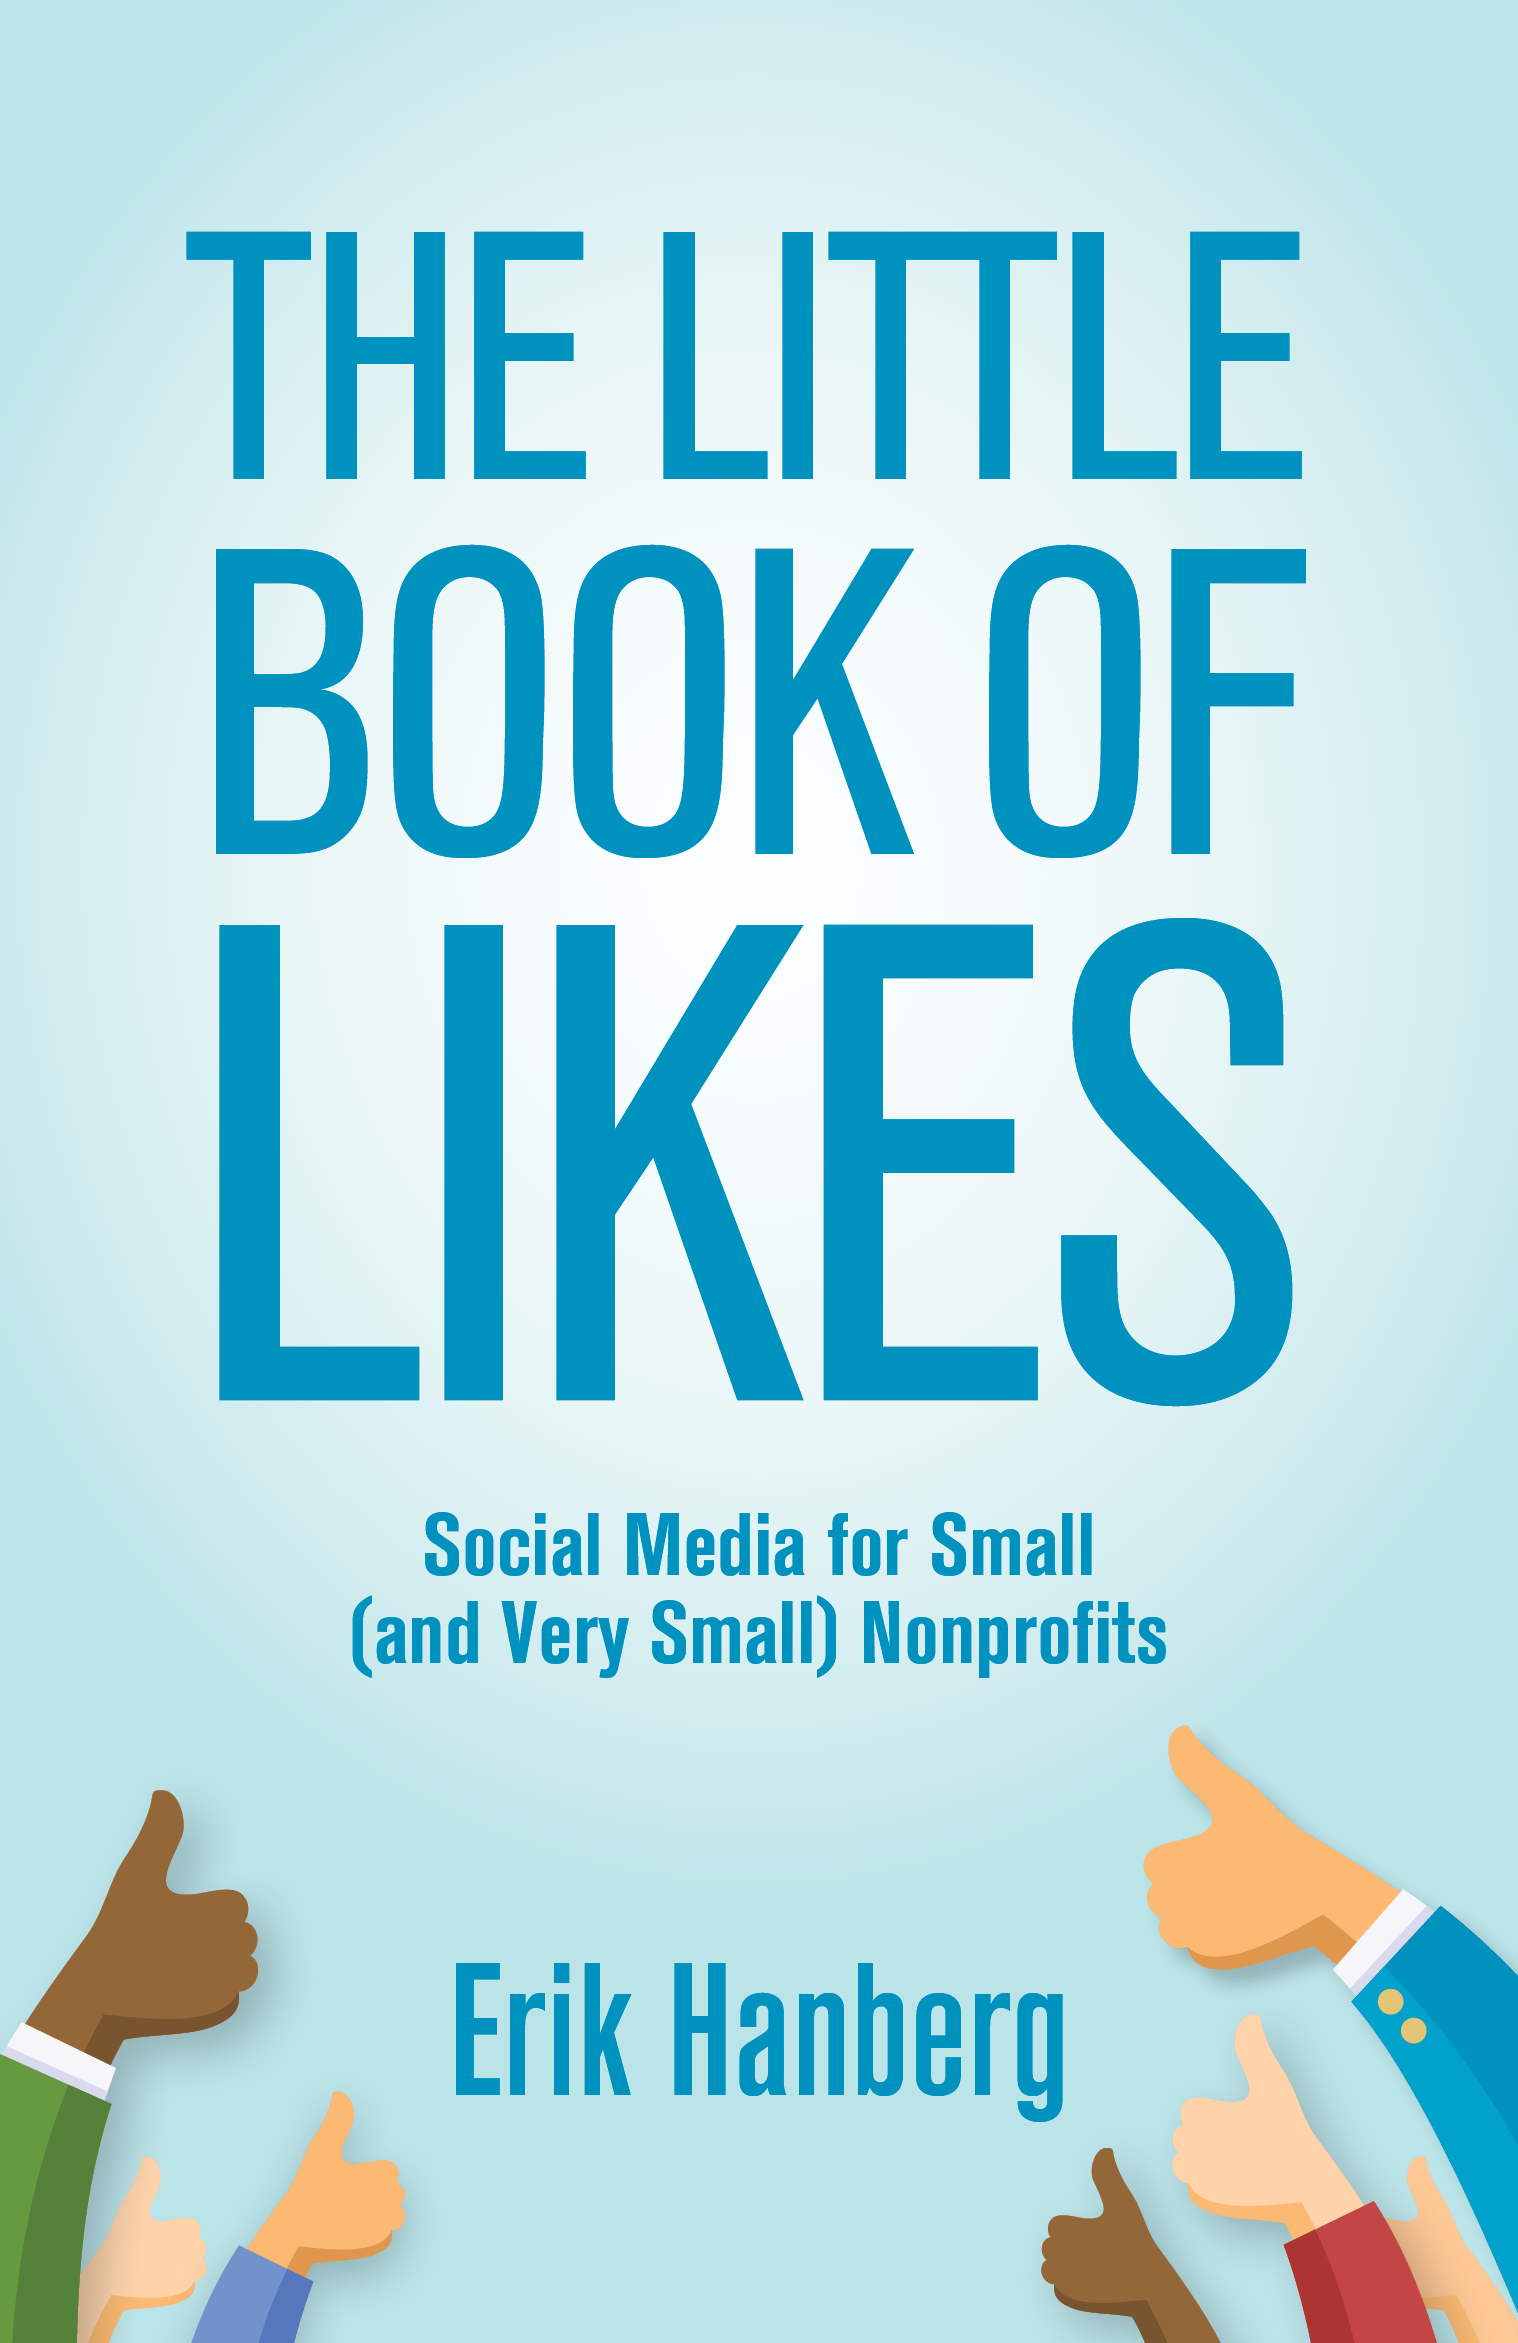 The Little Book of Likes